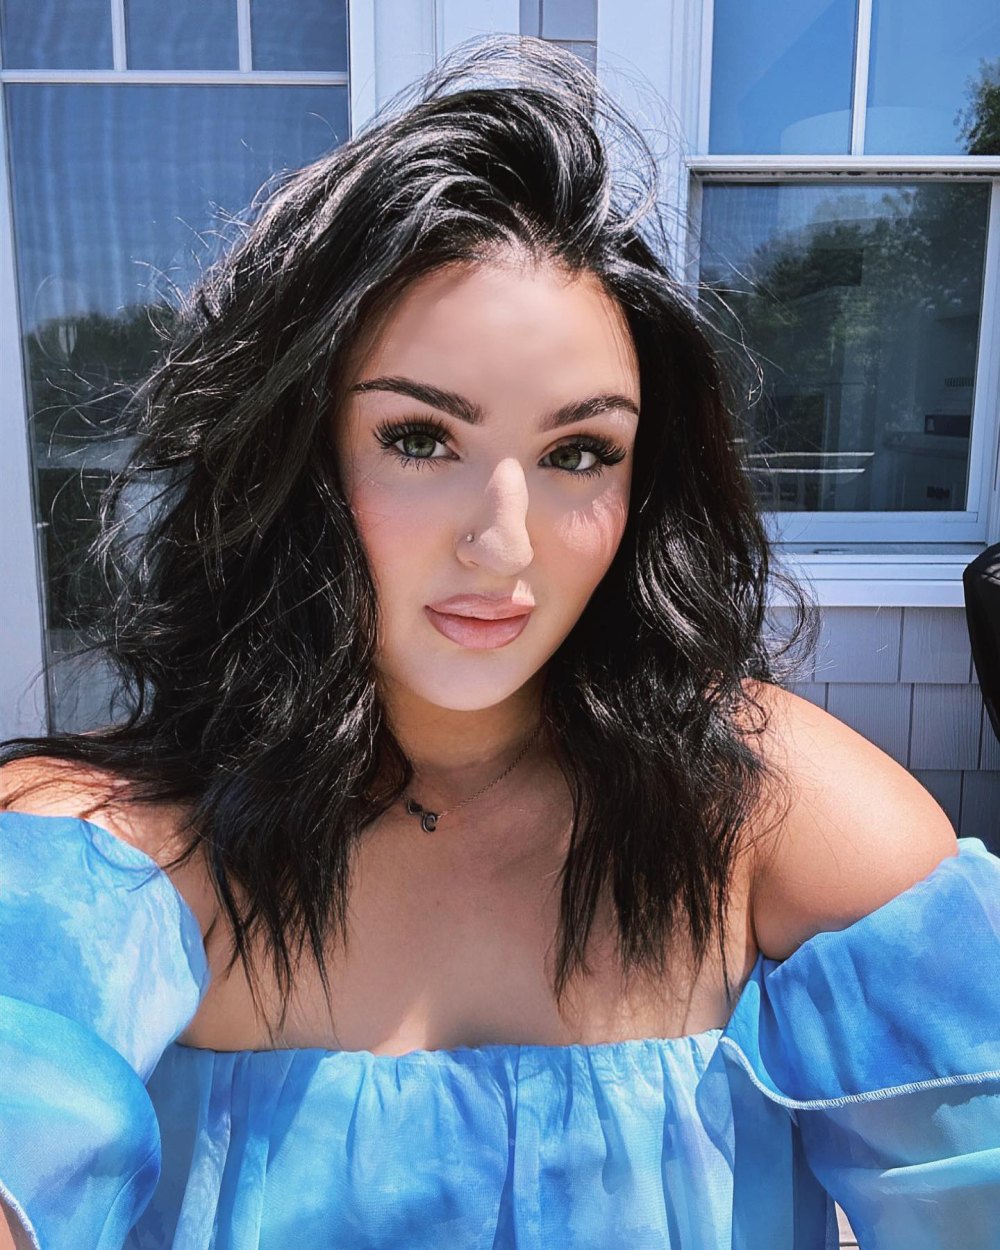 TikTok’s Mikayla Nogueira Denies Ozempic Helped Her Lose Weight, Talks Eating Disorder Recovery